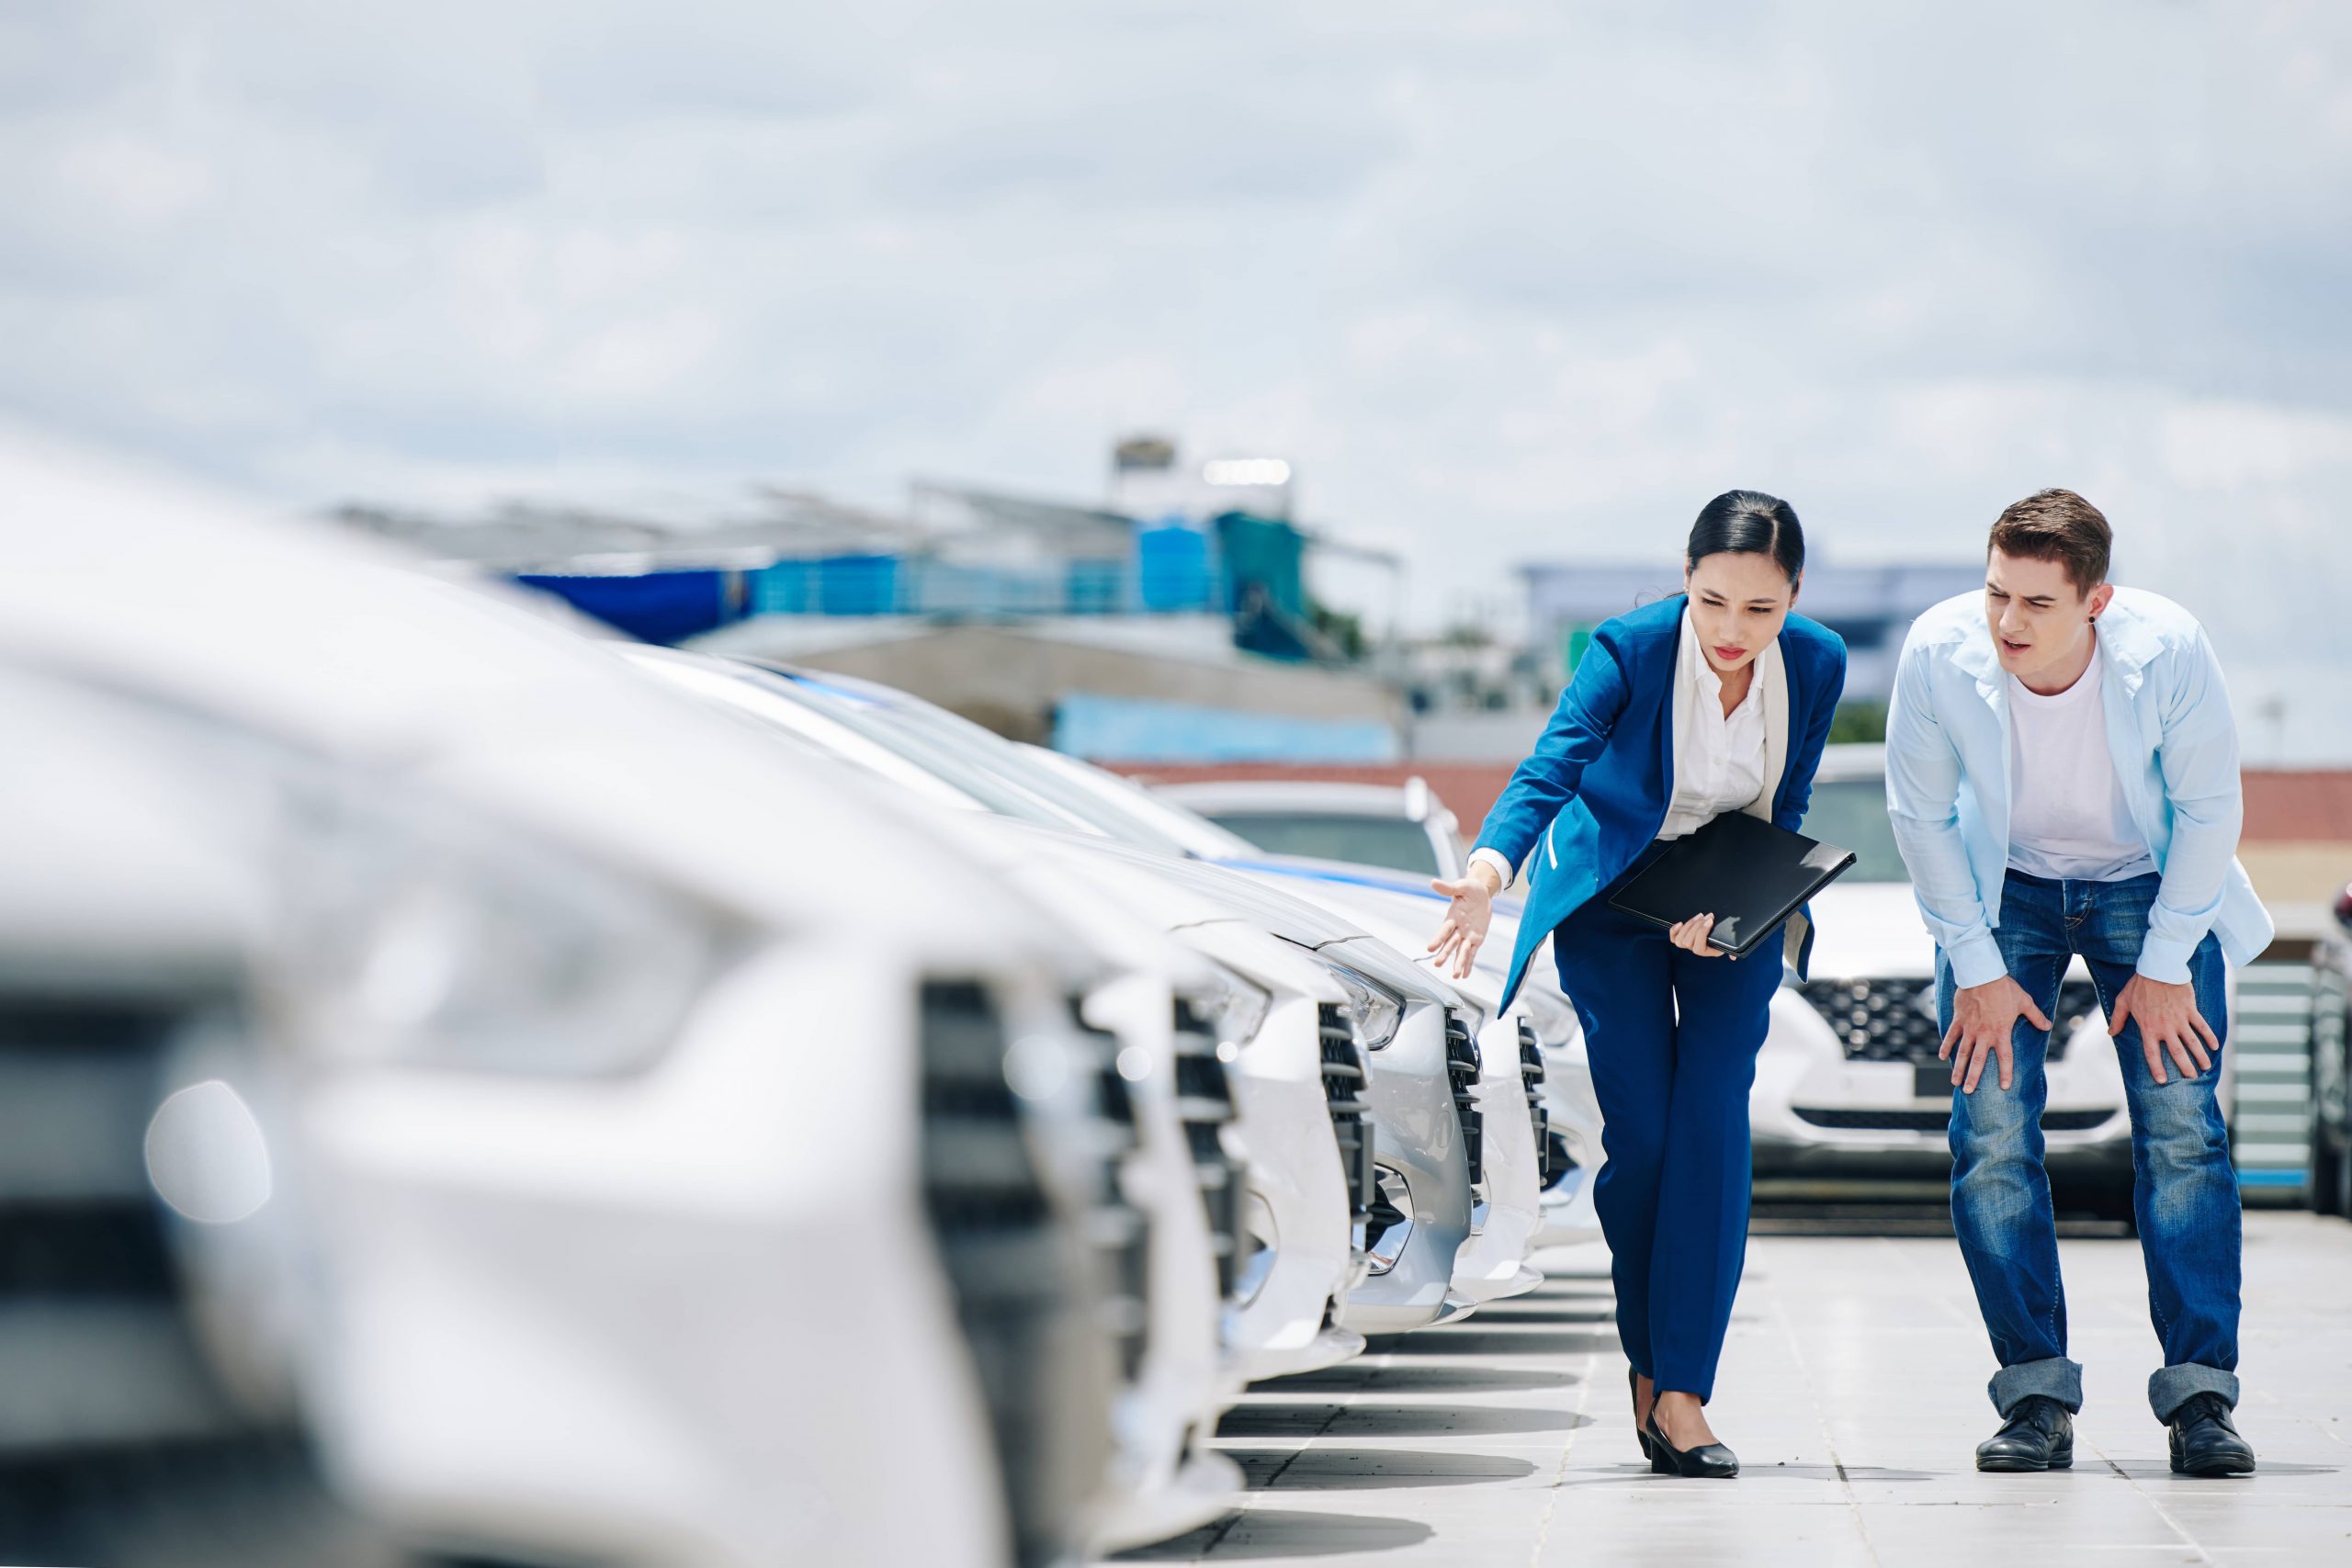 Understanding the Inventory at Used Car Dealerships